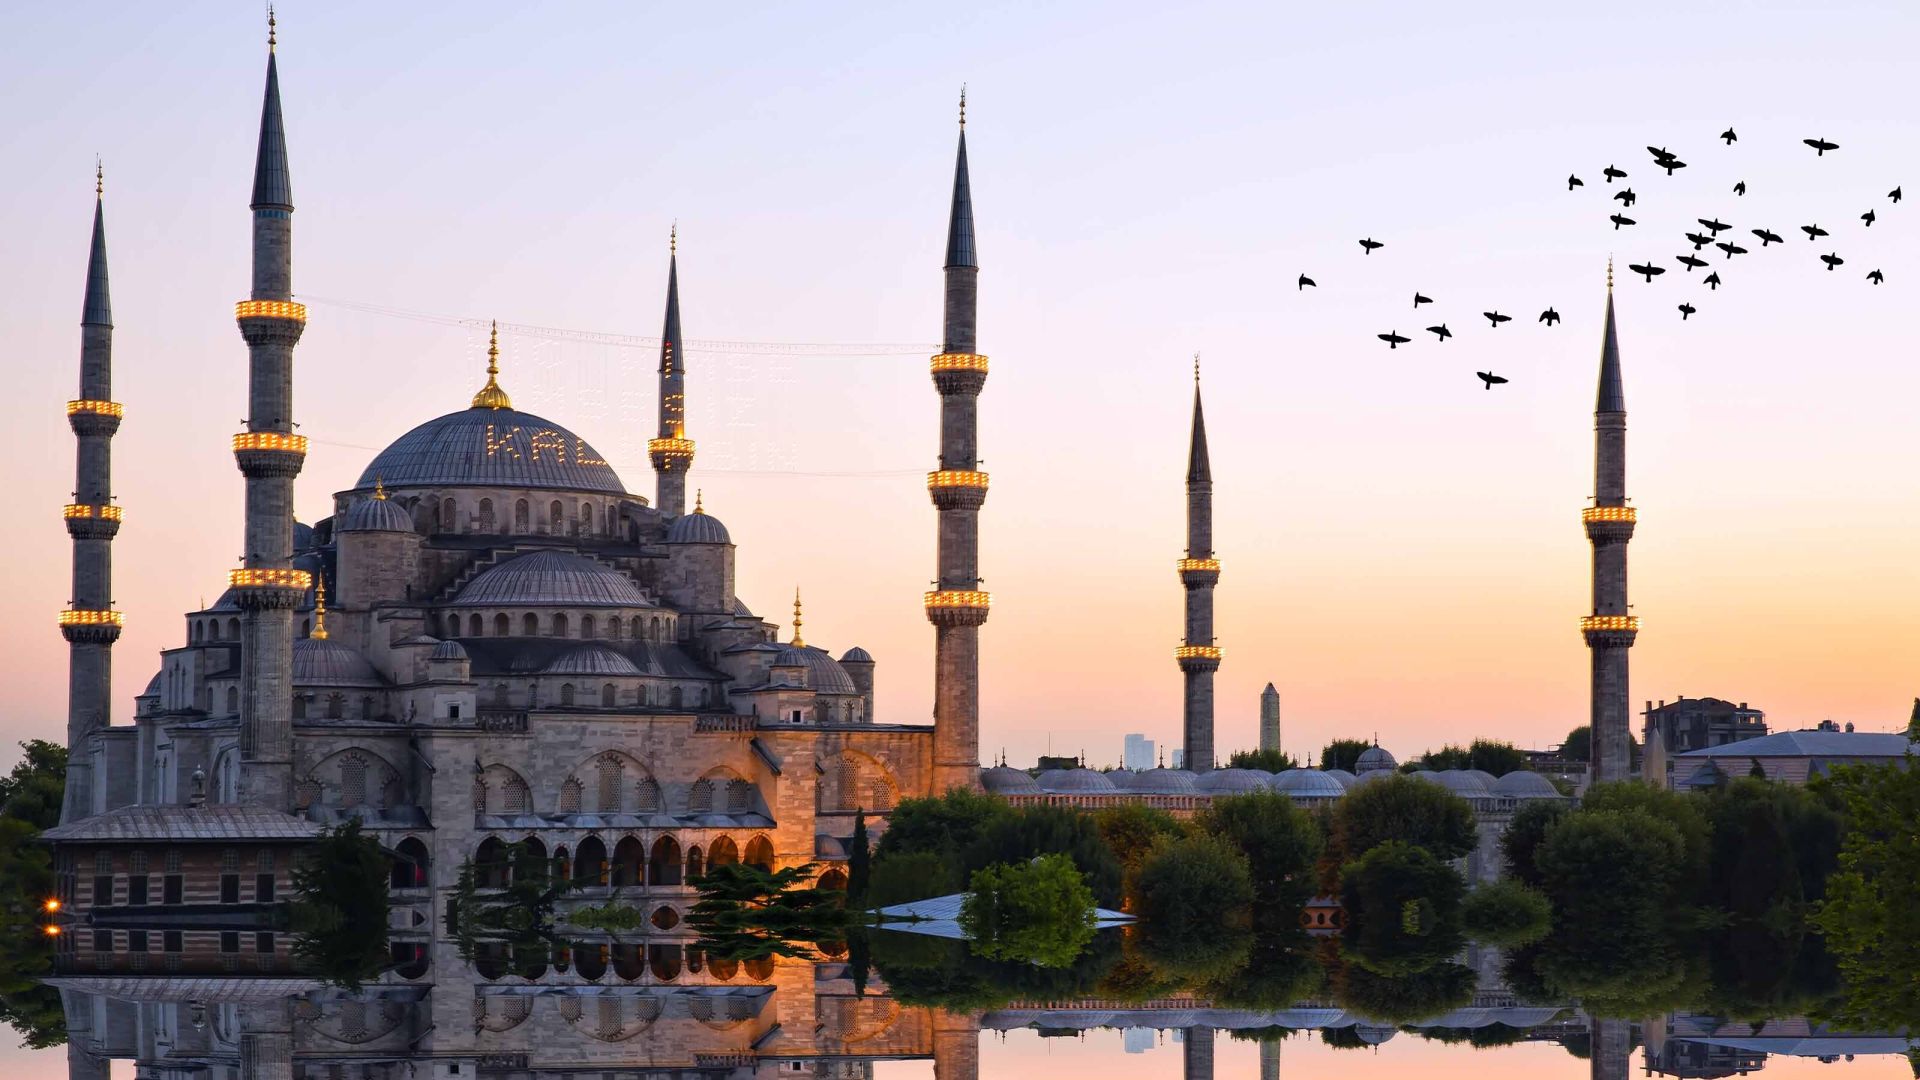 <p>                     <strong>Average daily cost: $23 <br> Average accommodation cost: $13 <br> Average daily meals cost: $7</strong>                   </p>                                      <p>                     Turkey is one of the most visited countries in the world but remains an underrated tourist destination. Straddling Europe and Asia, Turkey is a fabulous melting pot of cultures that can be seen in everything from architecture to cuisine. There's an assortment of choices for visitors, from mountain ranges to beach-littered coasts, to the sprawling colorful metropolis of Istanbul — Turkey has everything. Despite the devasting earthquakes that hit the country, many tourist destinations in the west of the country (hundreds of miles from the affected areas) are open and actively welcoming visitors. Tourist dollars will be all too vital for the rebuilding effort.                   </p>